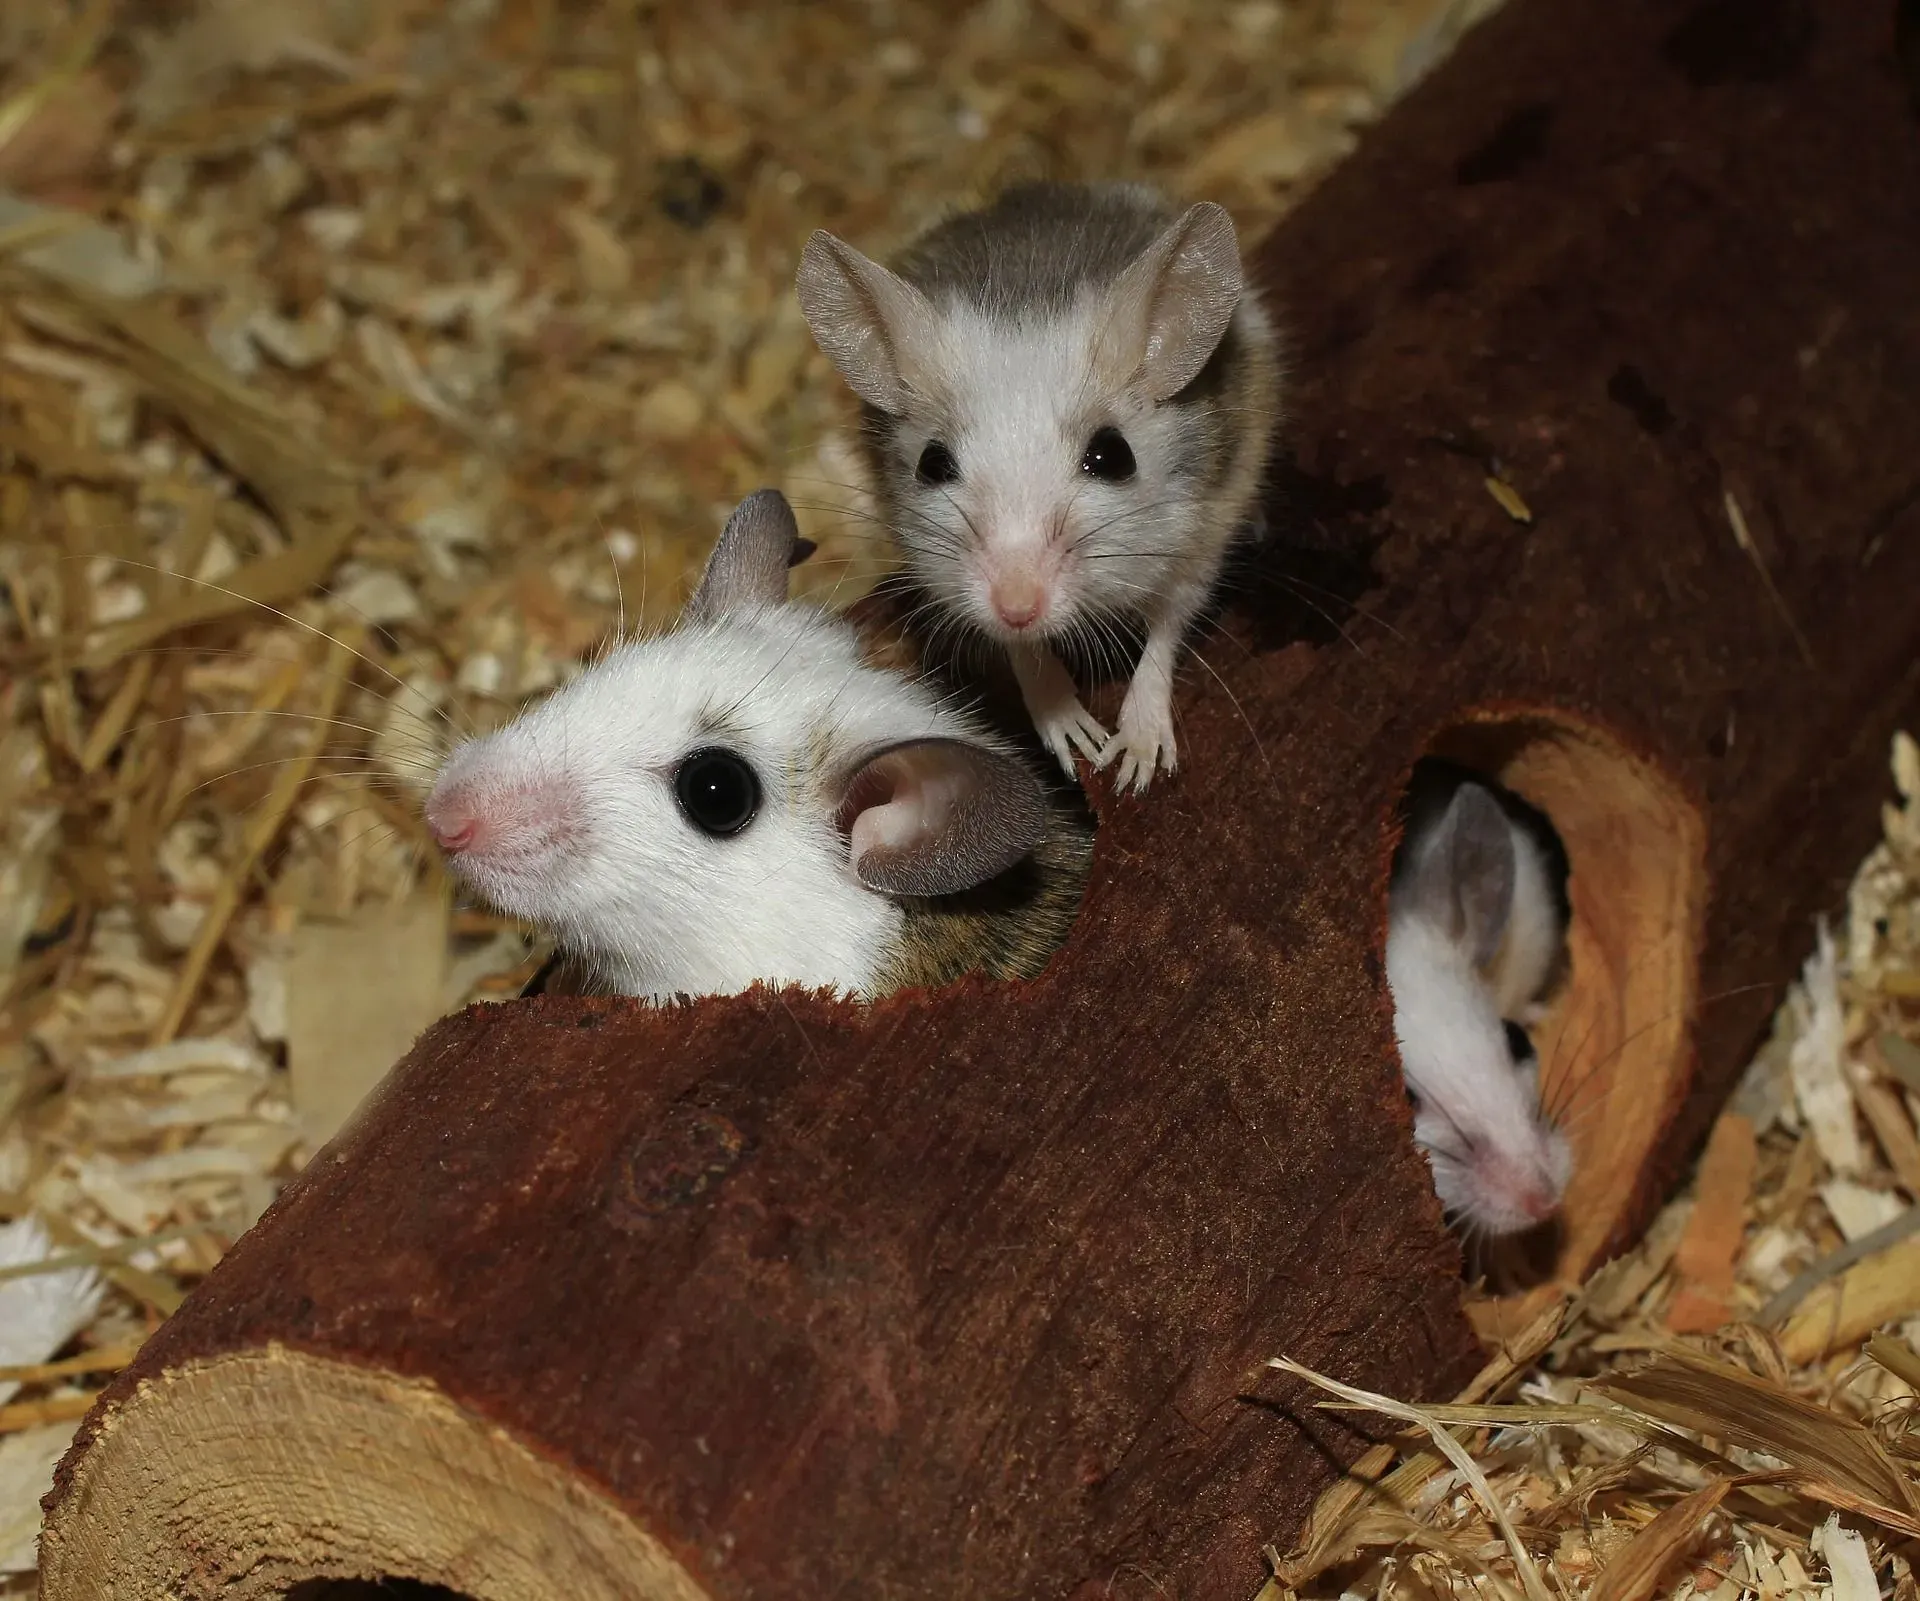 Mice are some of the cutest animals around to have as pets! But do mice hibernate?